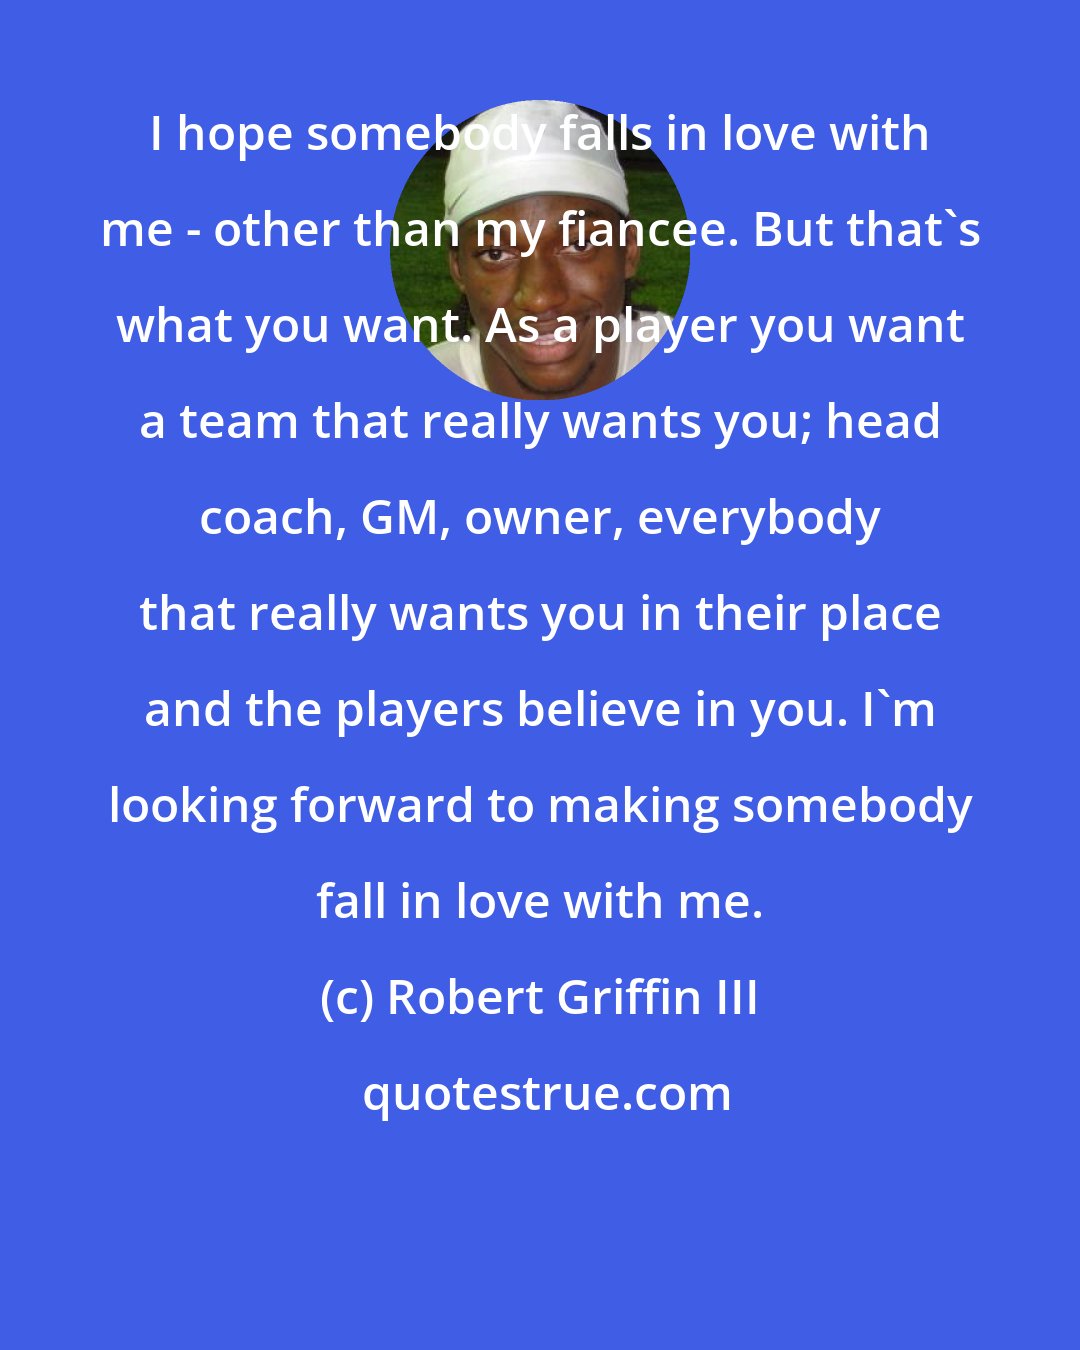 Robert Griffin III: I hope somebody falls in love with me - other than my fiancee. But that's what you want. As a player you want a team that really wants you; head coach, GM, owner, everybody that really wants you in their place and the players believe in you. I'm looking forward to making somebody fall in love with me.